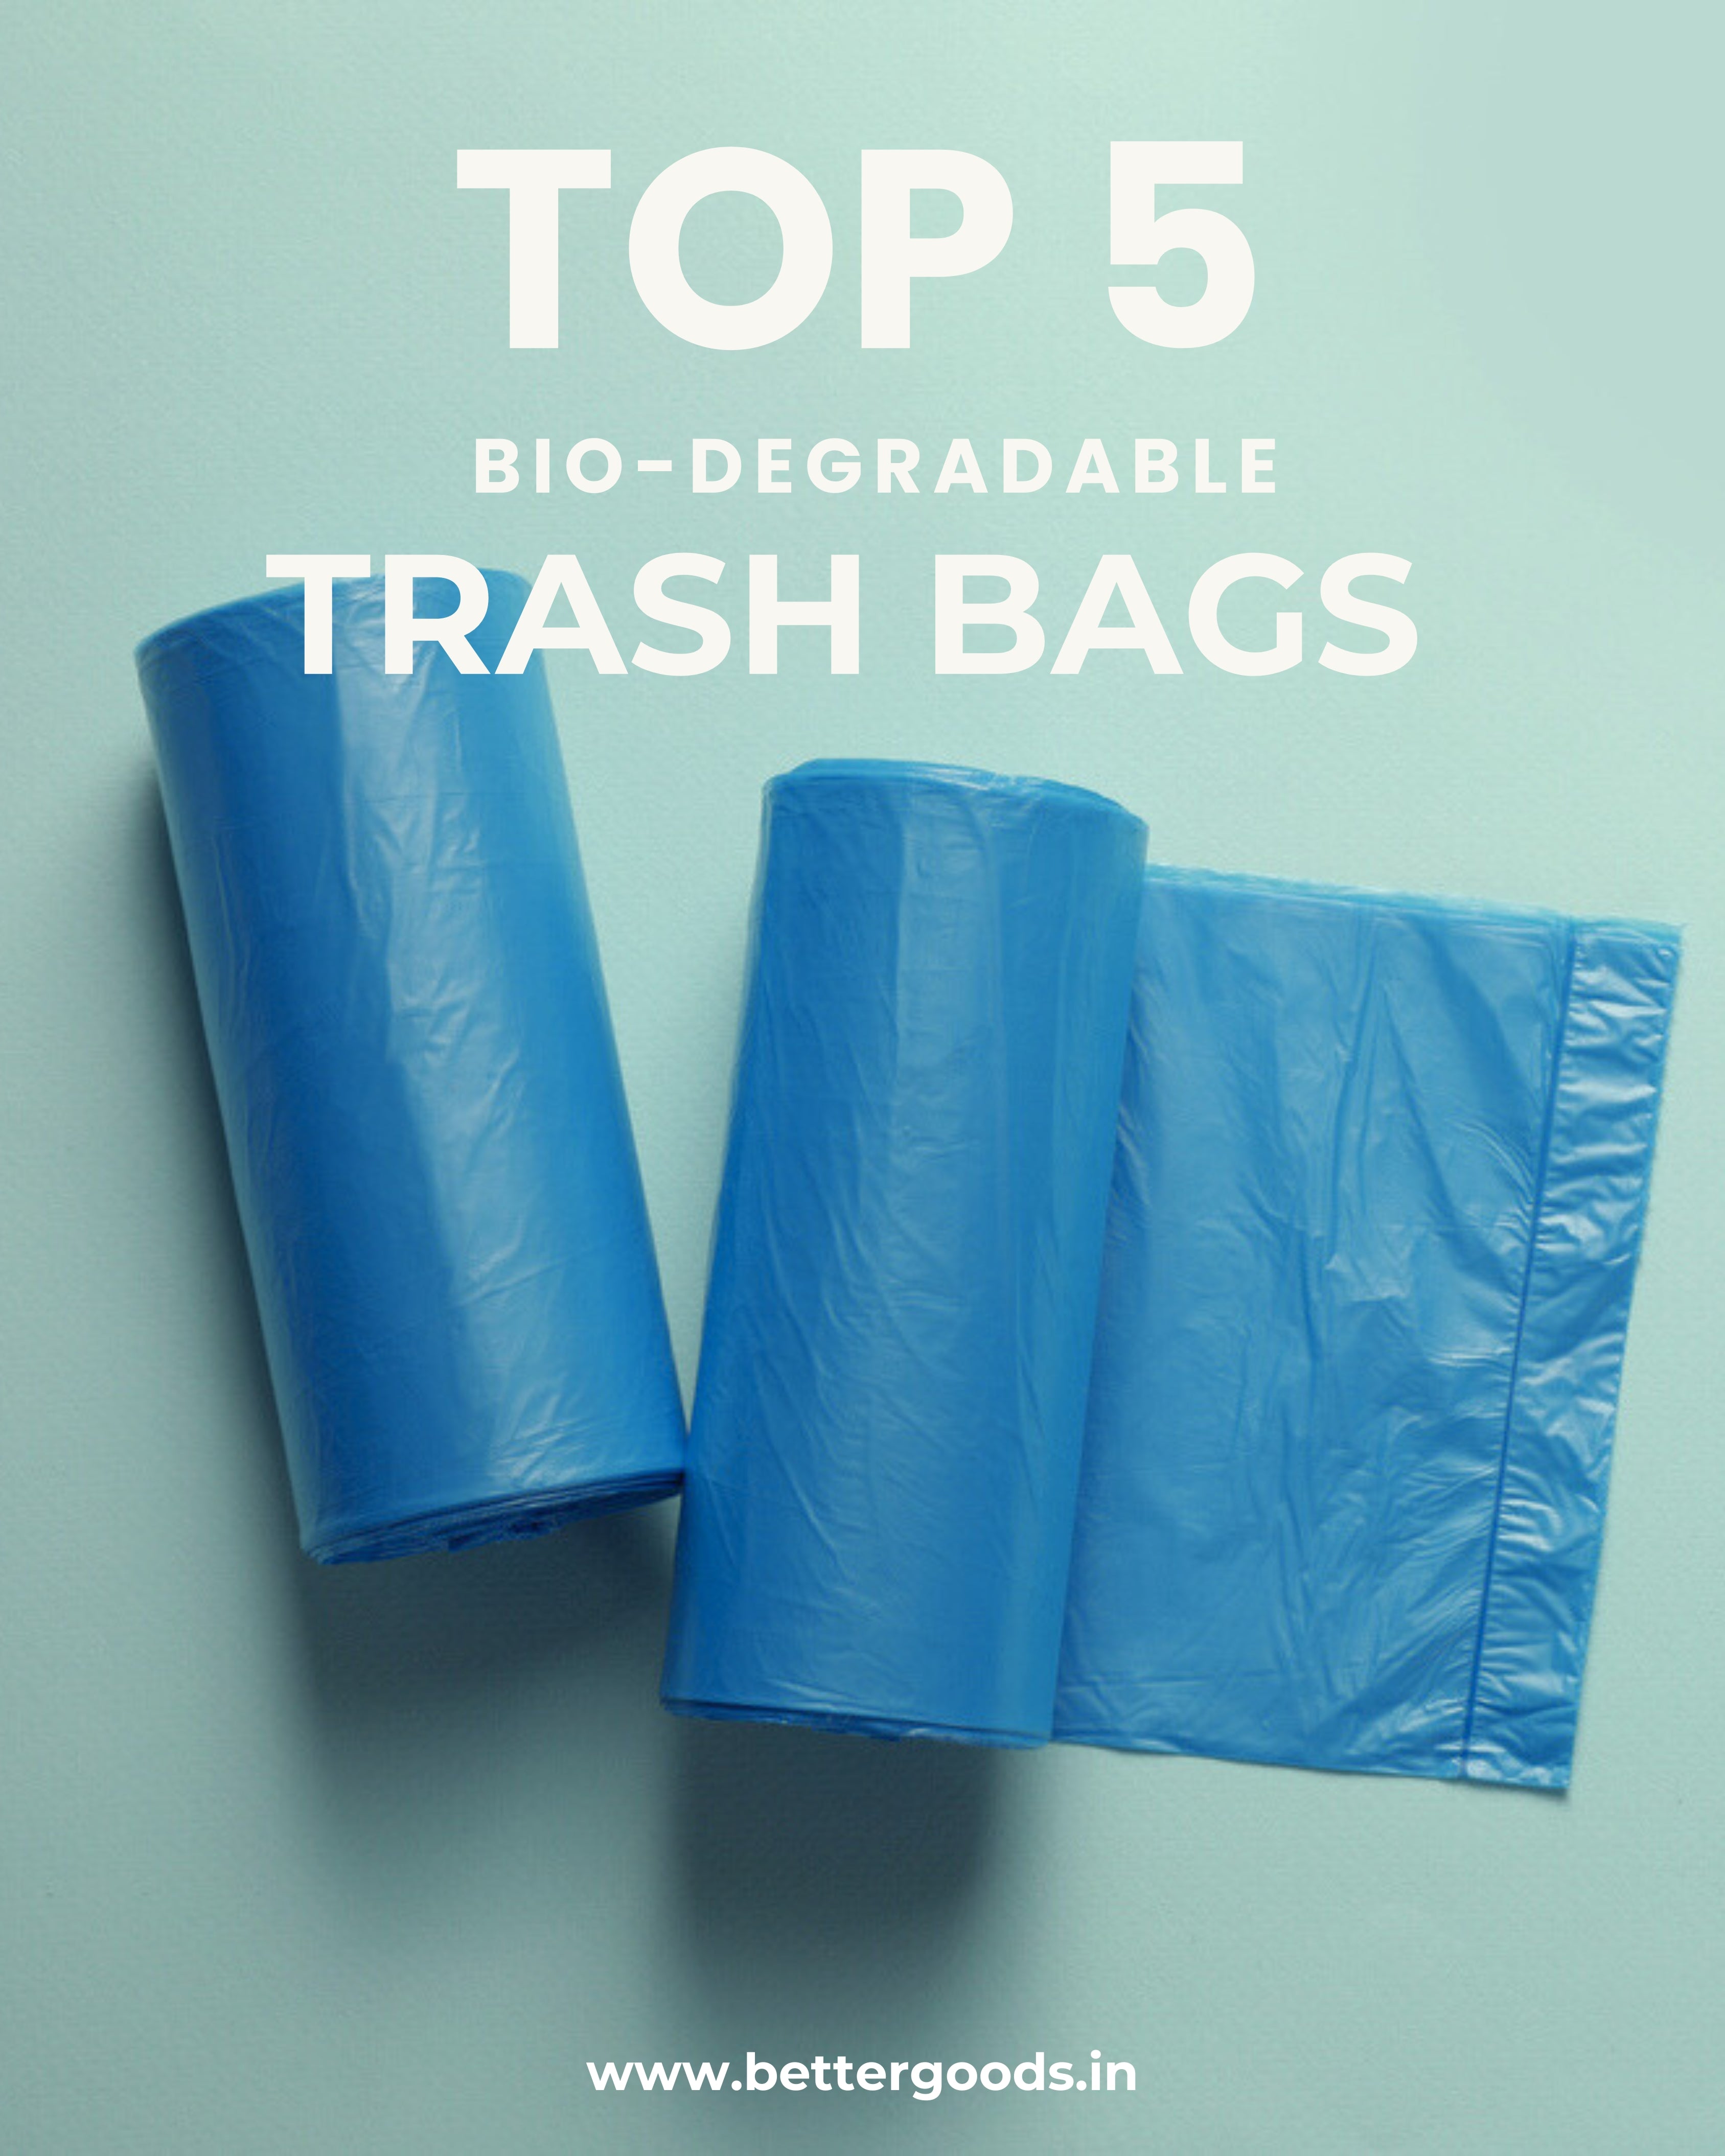 Top 5 Biodegradable Trash Bags for a Greener Home